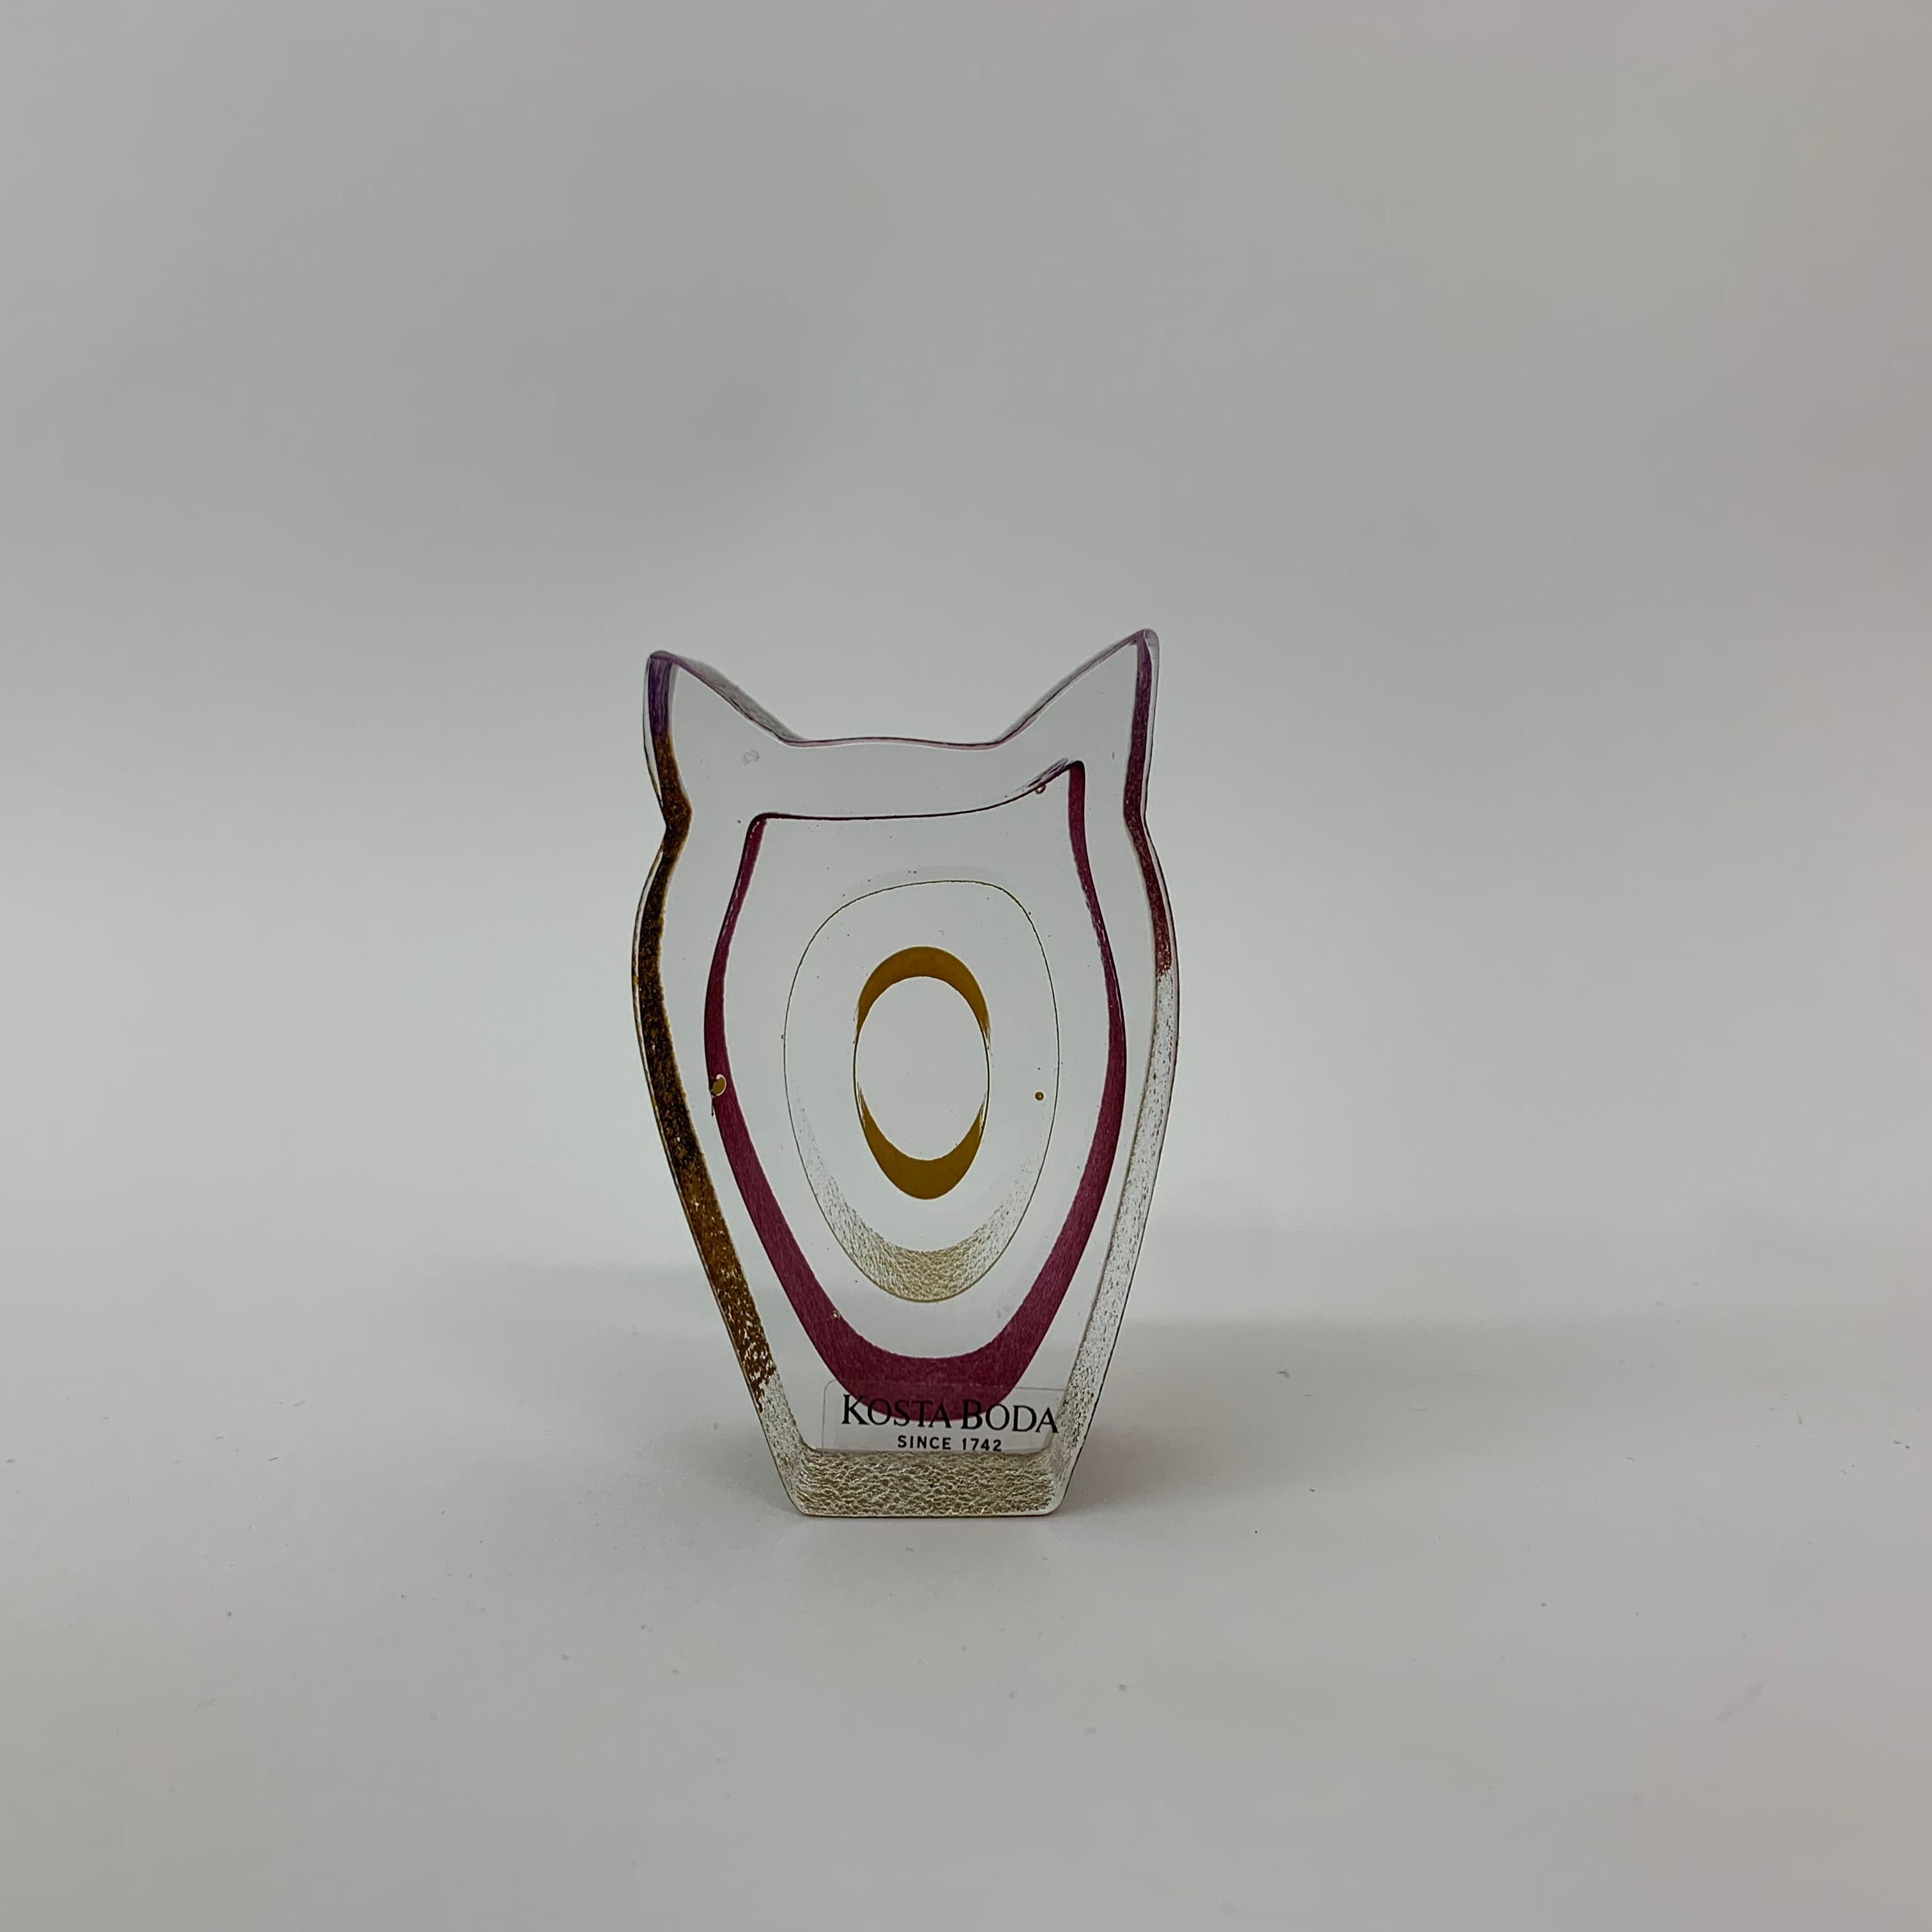 Bertill Vallien for Kosta Boda sweden mini sculpture Owl ”Night Eyes”

Bertil Vallien has designed many classics for the Swedish glassworks in Åfors, Boda, and Kosta. One of the most well-known series is ”Minisculptures” from 1993. Figurine with